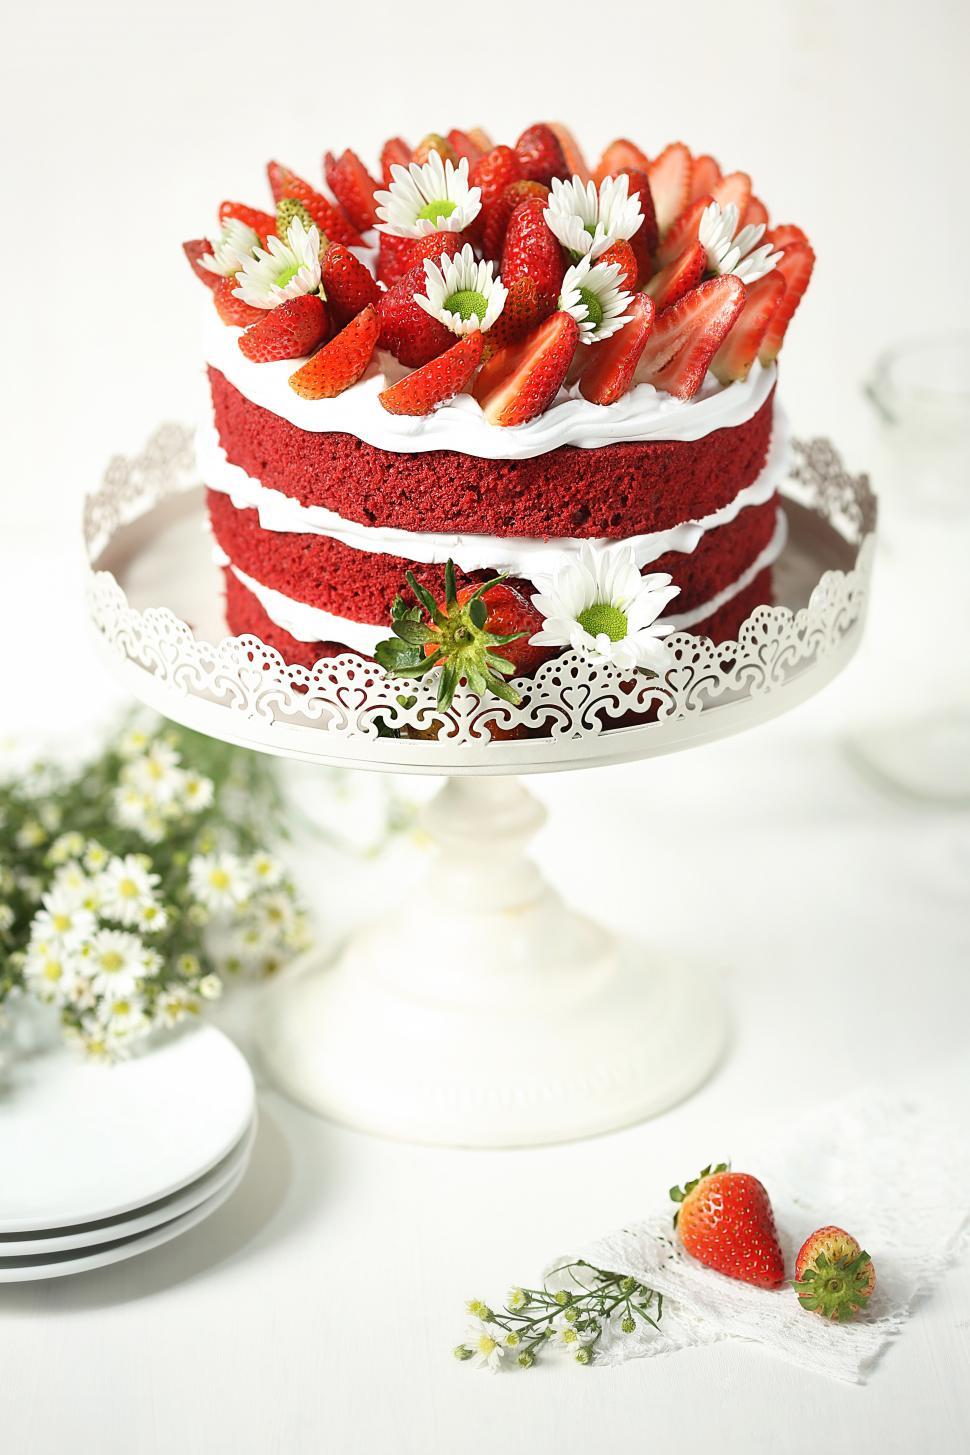 Free Image of Red Velvet Strawberry Cheesecake on cake stand 